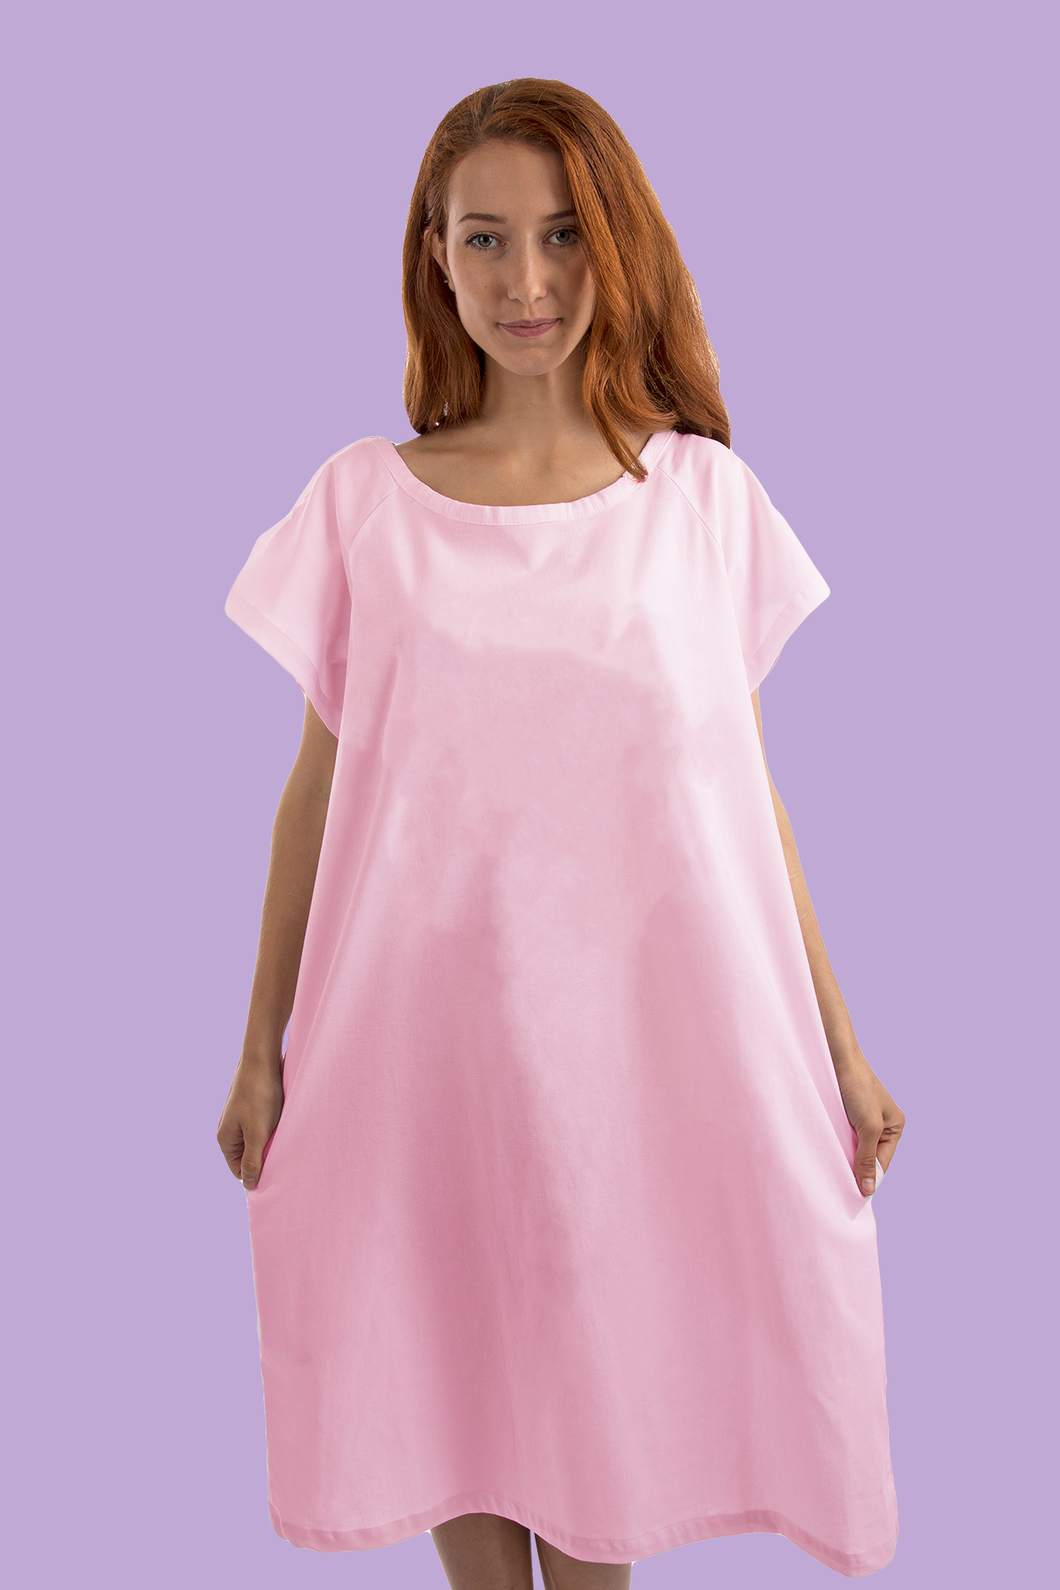 NY Threads Hospital Gown Soft and Stylish Patient Gown (Small-Medium White  Rose - Pink) Small-Medium White Rose - Pink